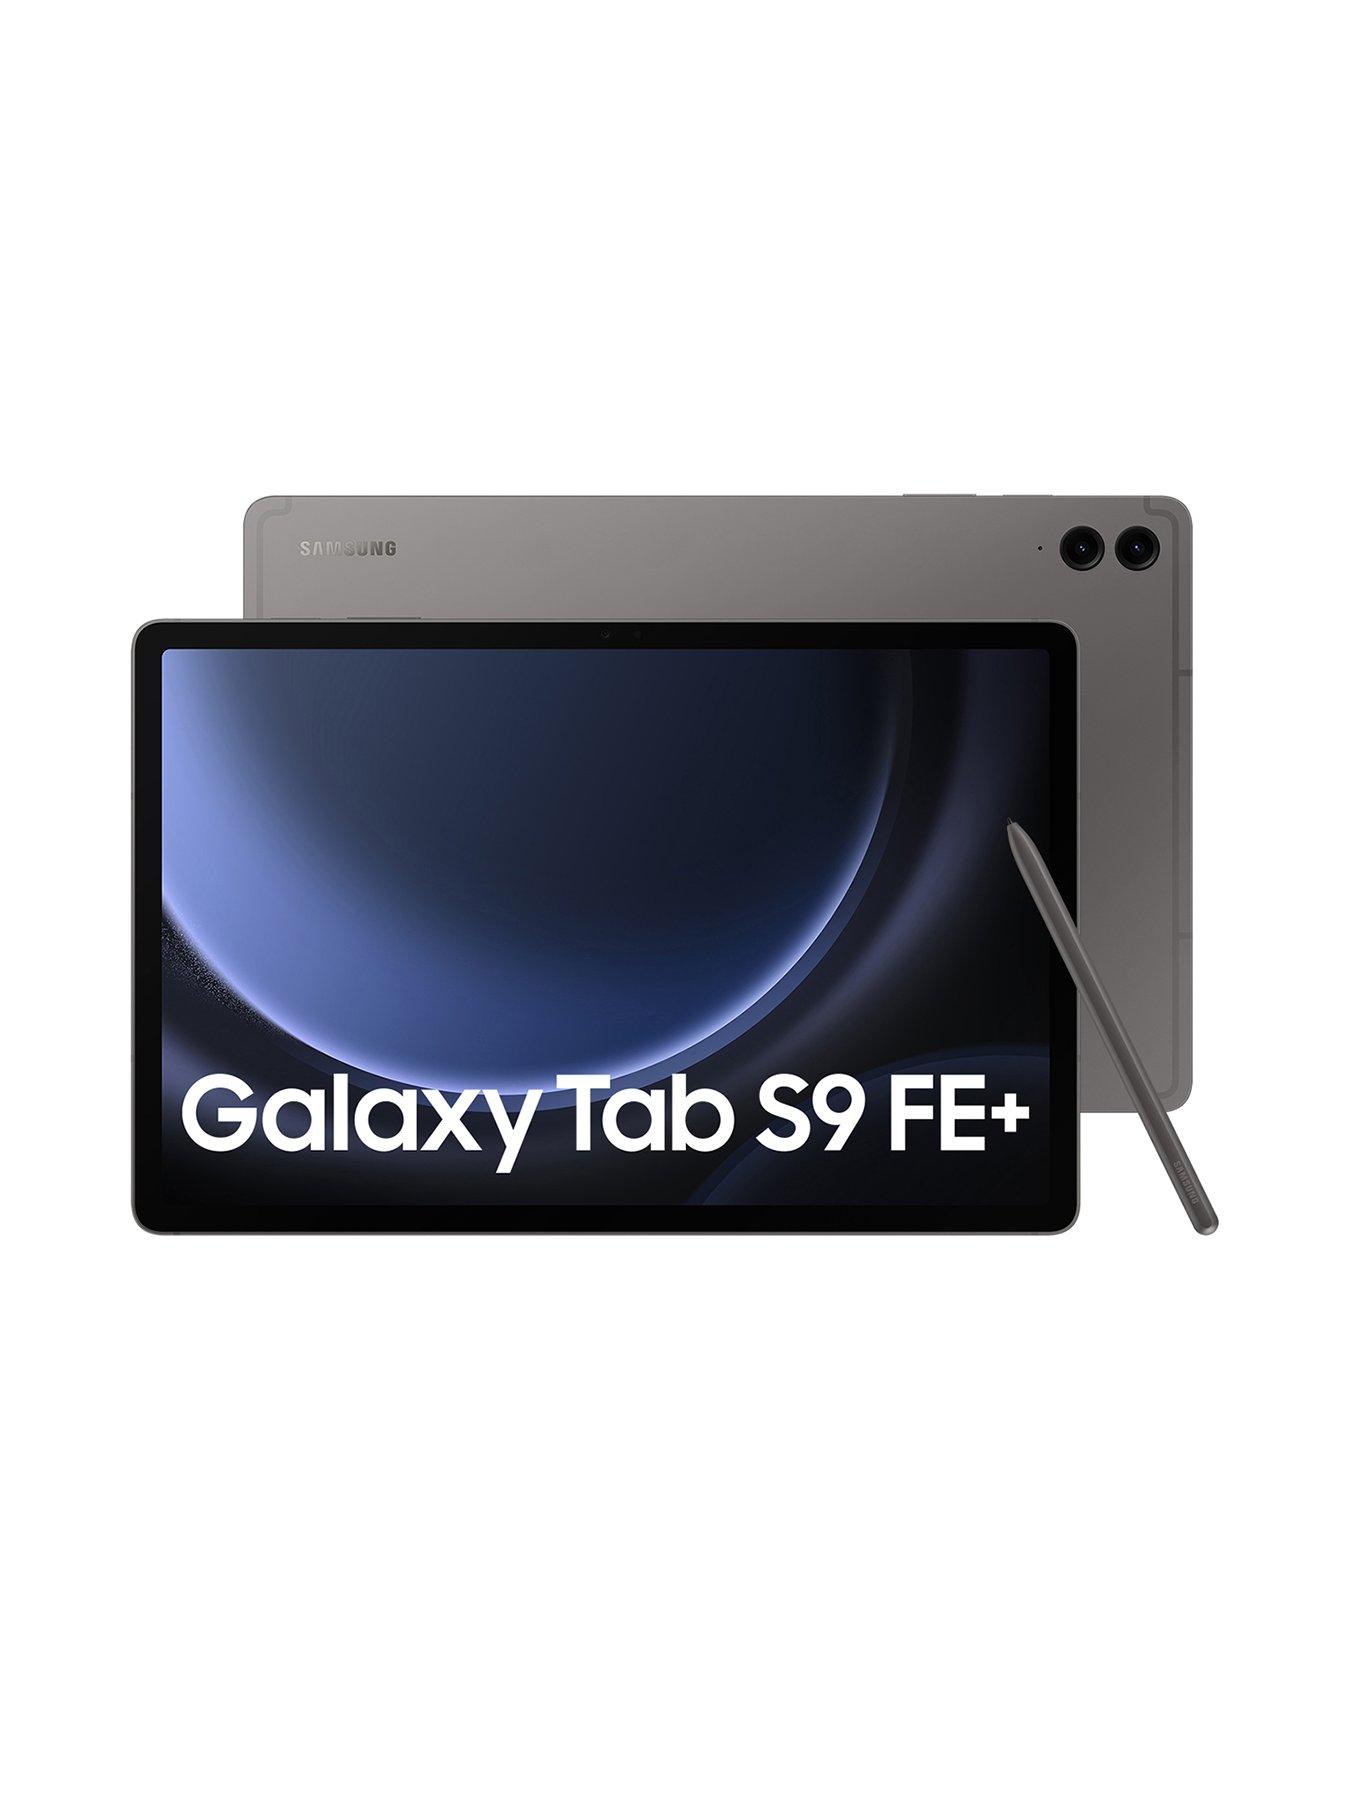 Samsung unveils its first FE tablets, meet the Galaxy Tab S9 FE+ and Galaxy  Tab S9 FE (Now Available) 